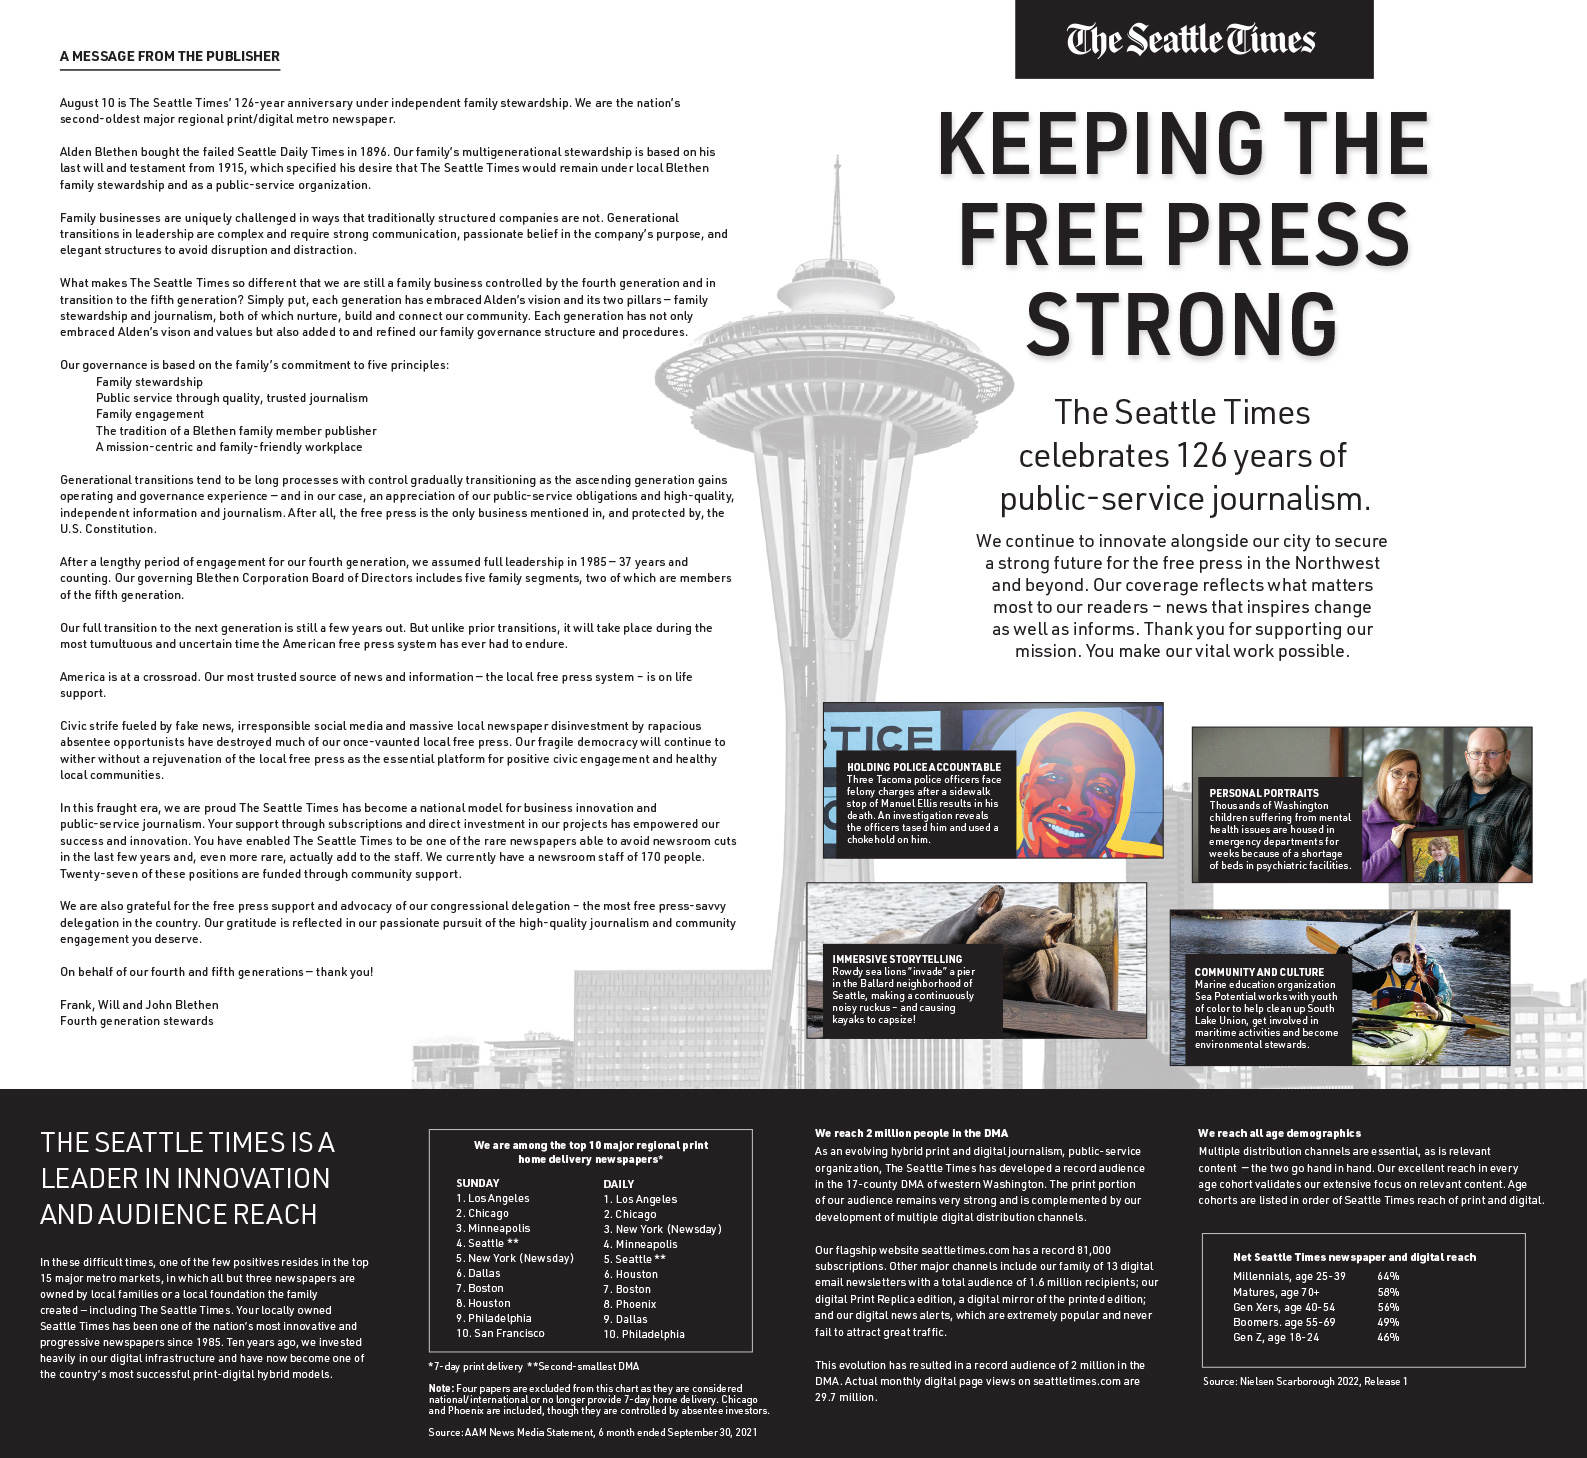 The Seattle Times' 126th anniversary message to its community